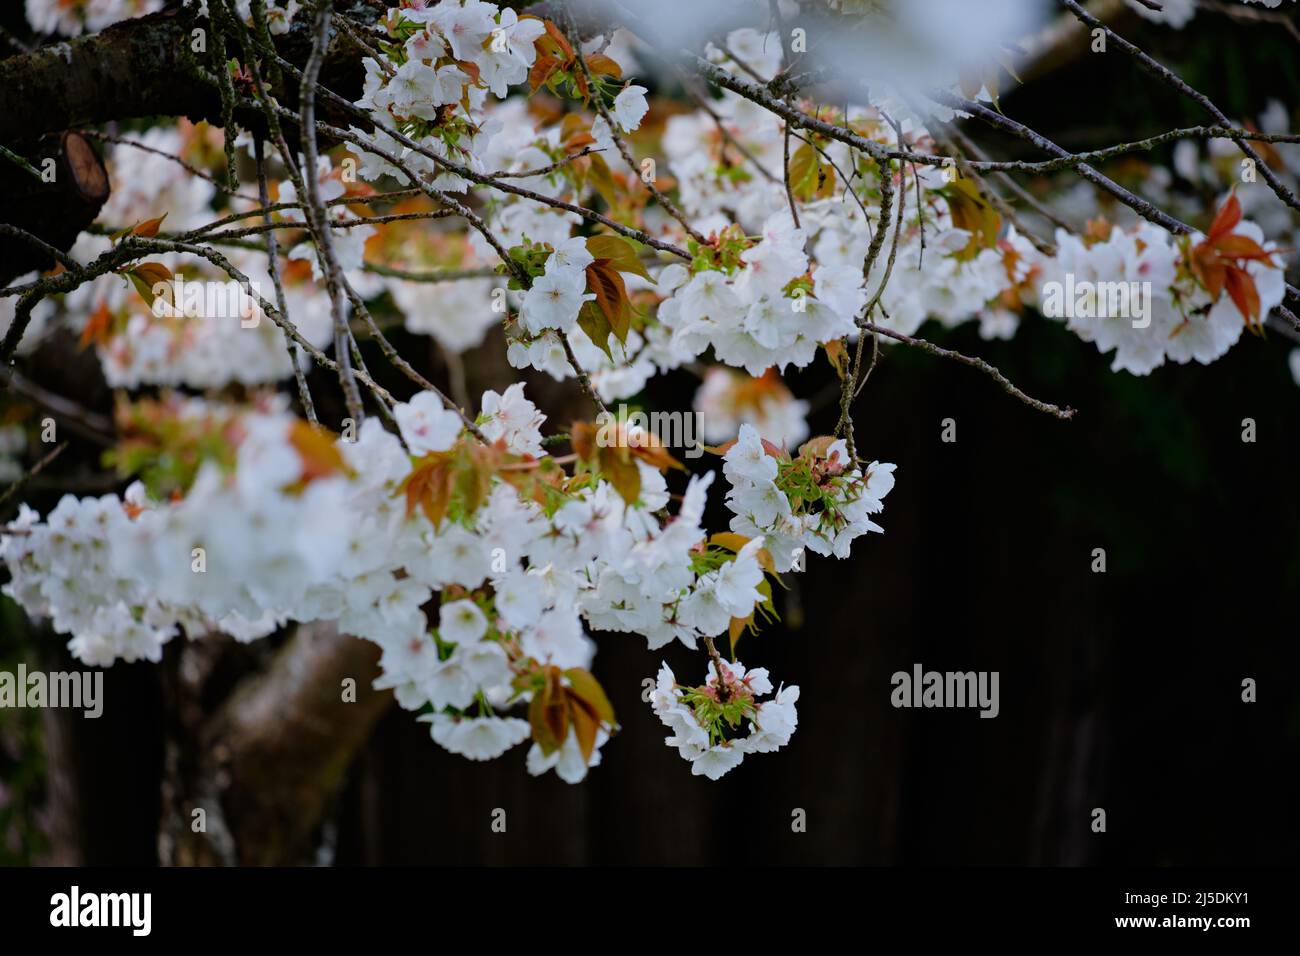 Shallow depth-of-field captures delicate white cherry tree blossoms in situ.  Dark background provides copy space and contrast. Stock Photo